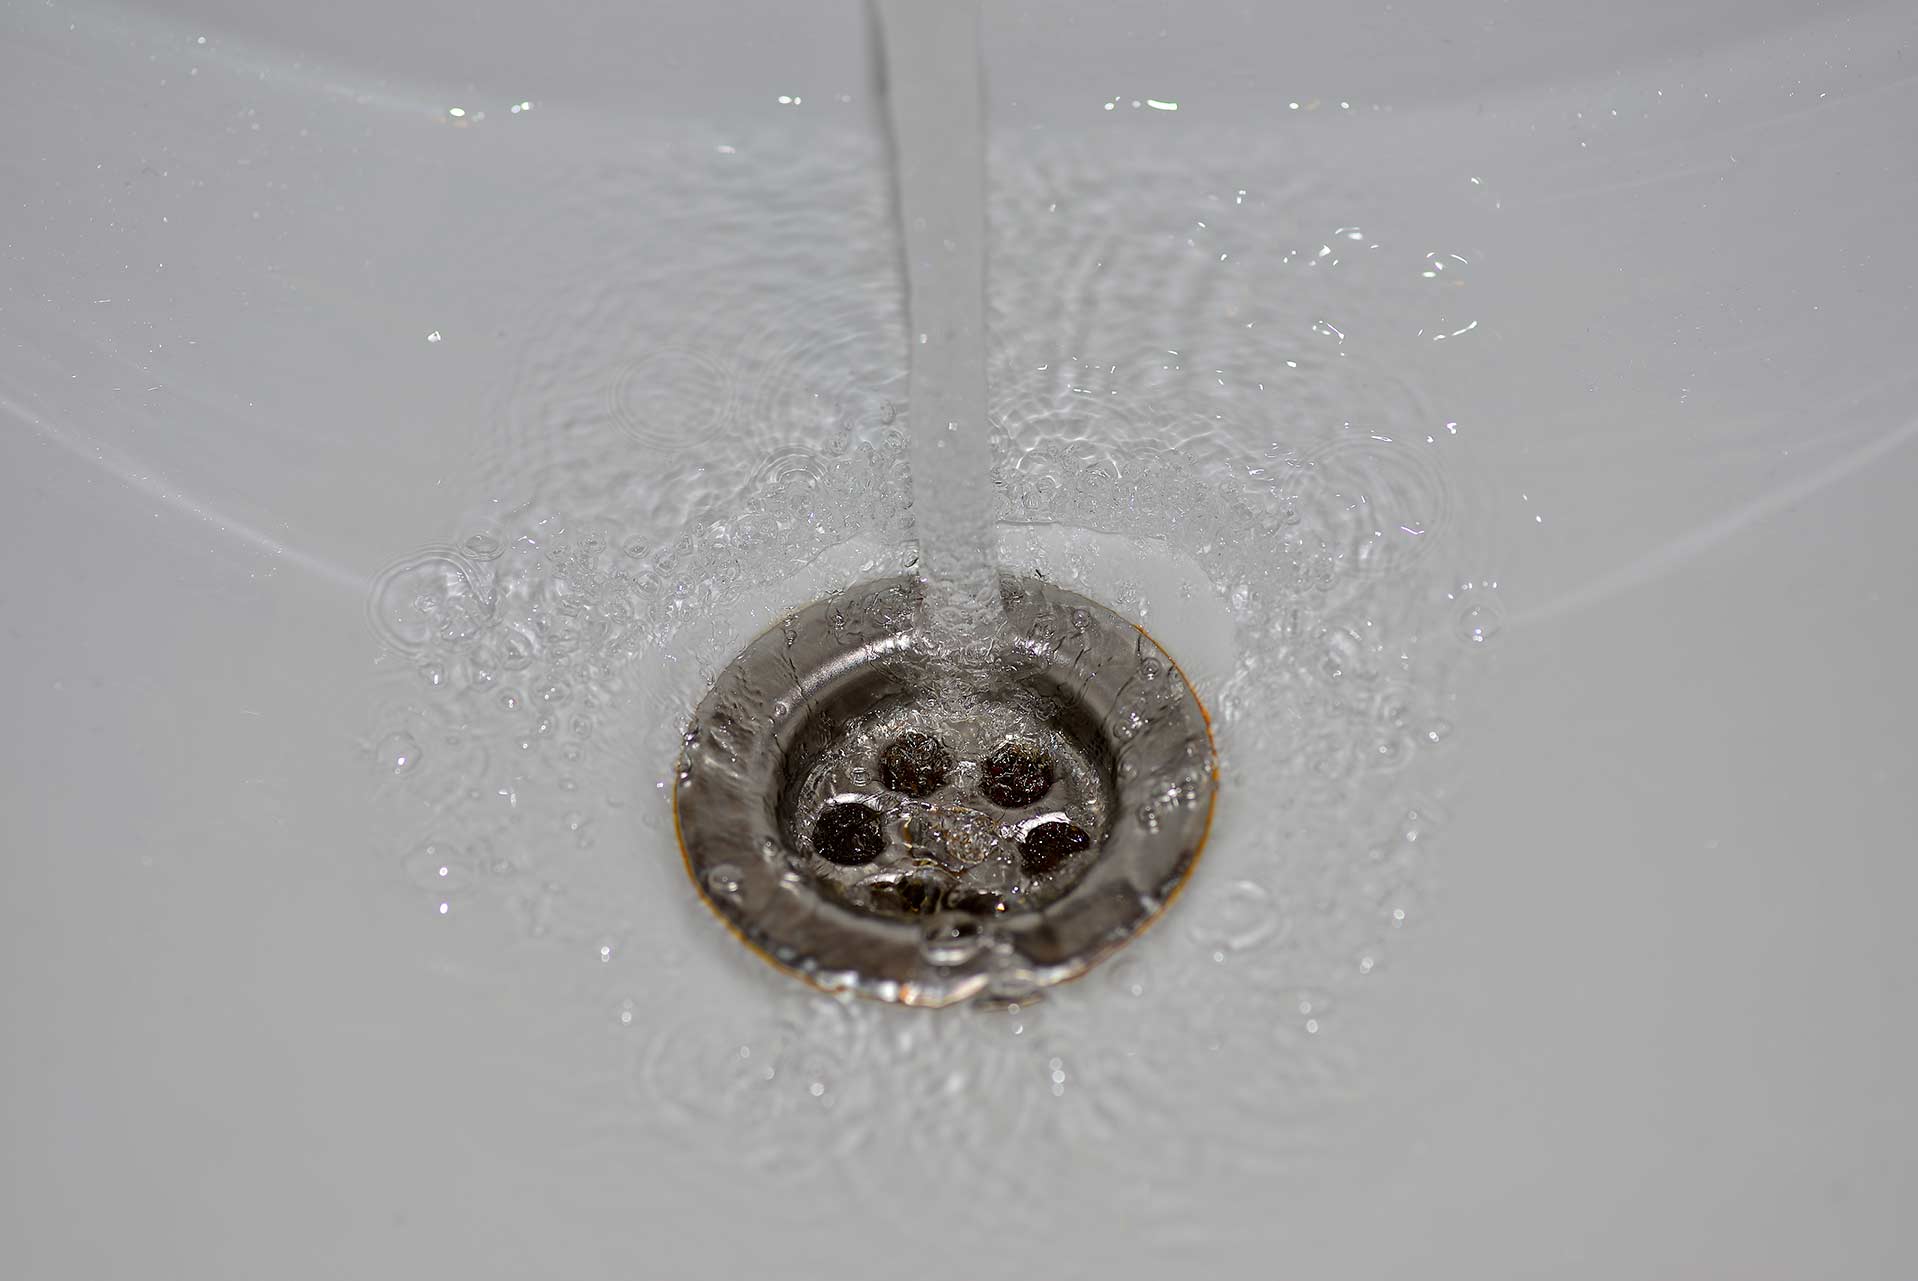 A2B Drains provides services to unblock blocked sinks and drains for properties in Worthing.